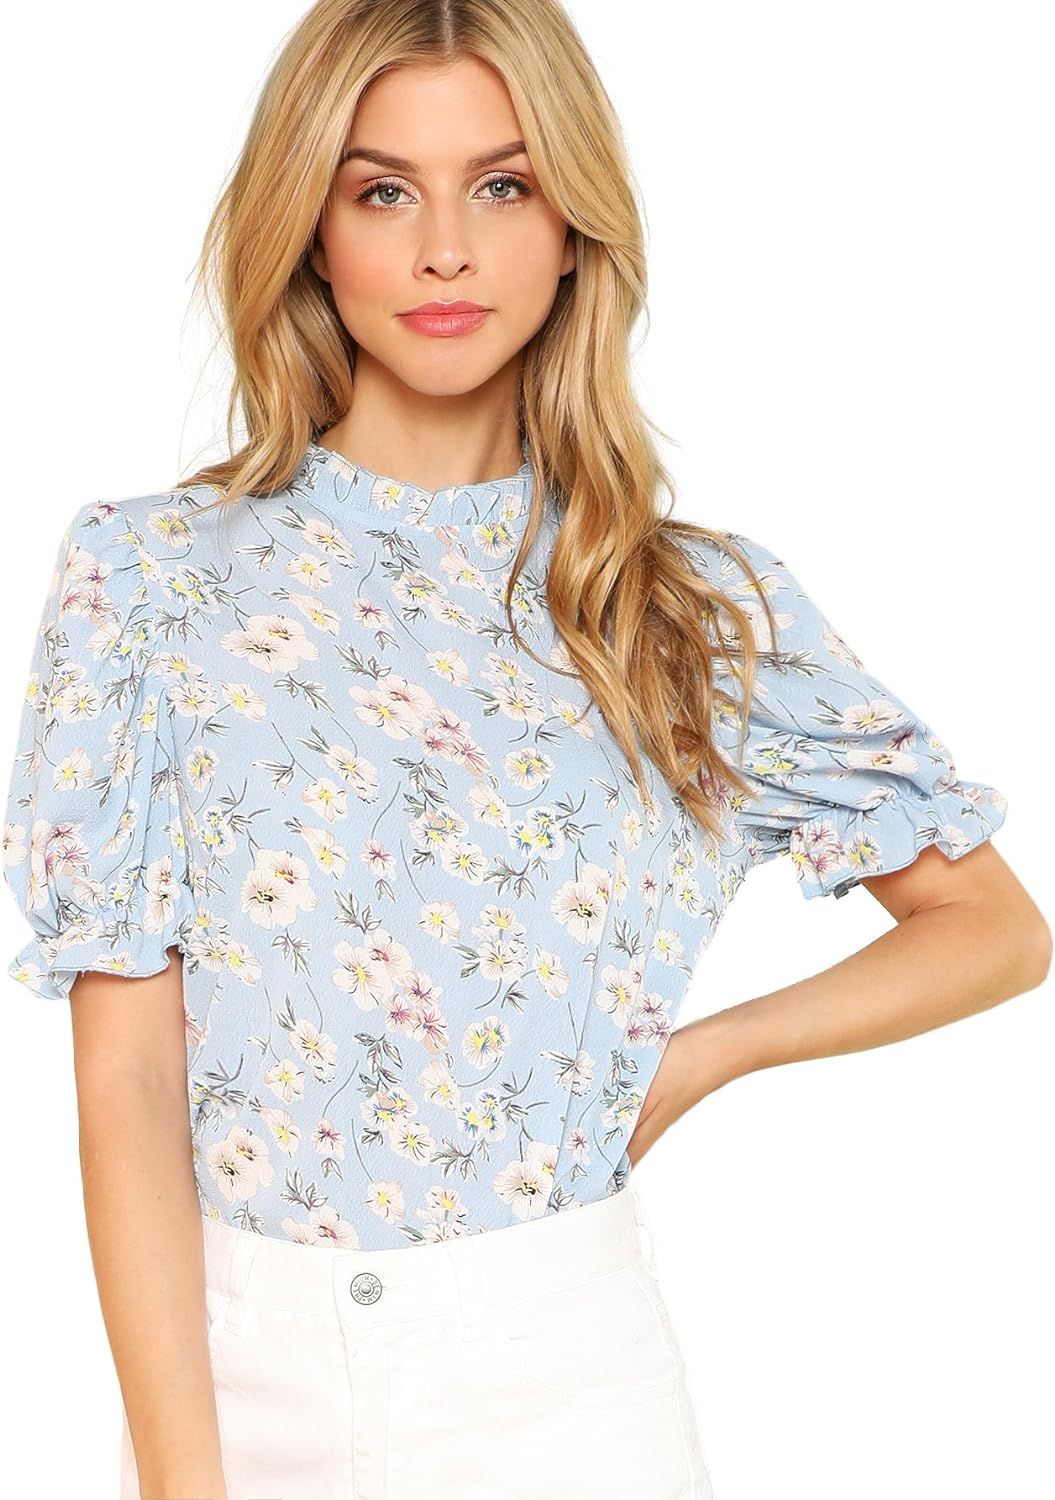 Romwe Women's Floral Print Ruffle Puff Short Sleeve Casual Blouse Tops | Amazon (US)